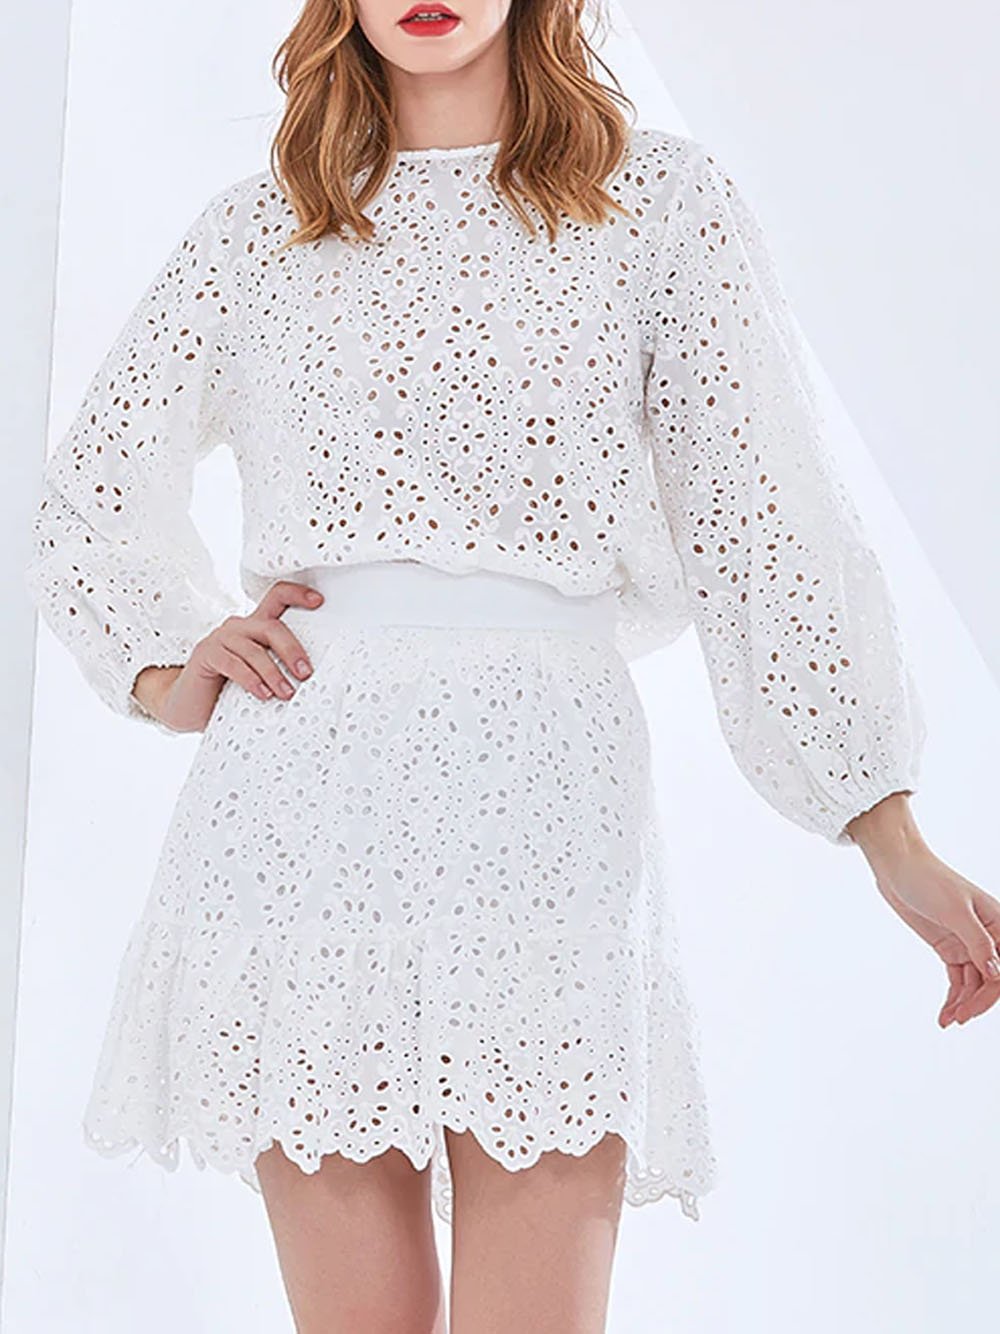 AVERY Lace Blouse & Skirt Set in White